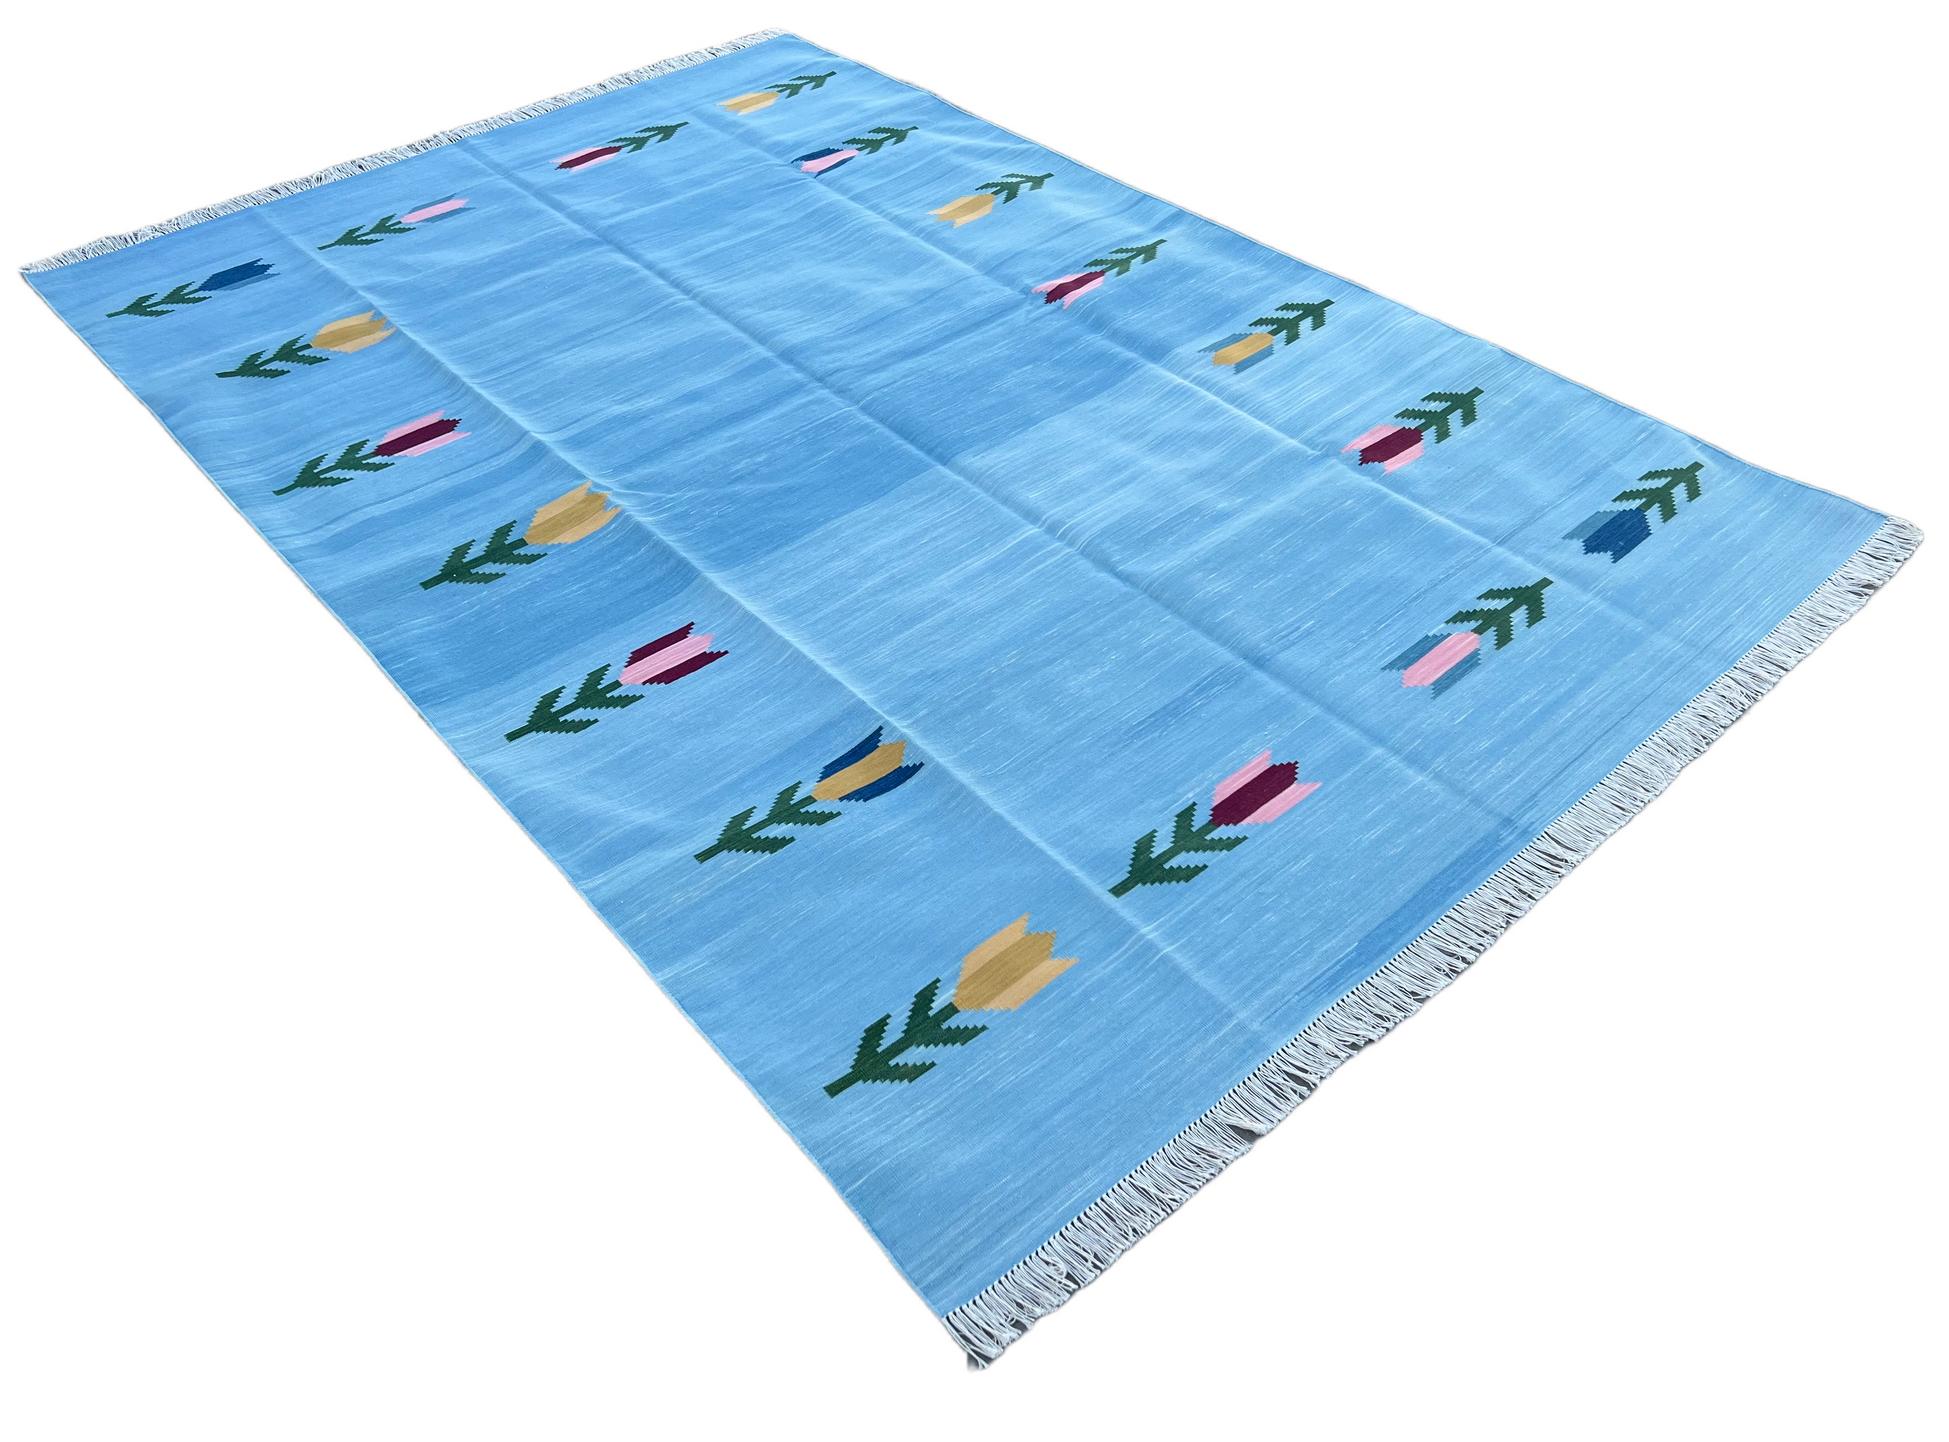 Hand-Woven Handmade Cotton Area Flat Weave Rug, Sky Blue & Red Leaf Pattern Indian Dhurrie For Sale